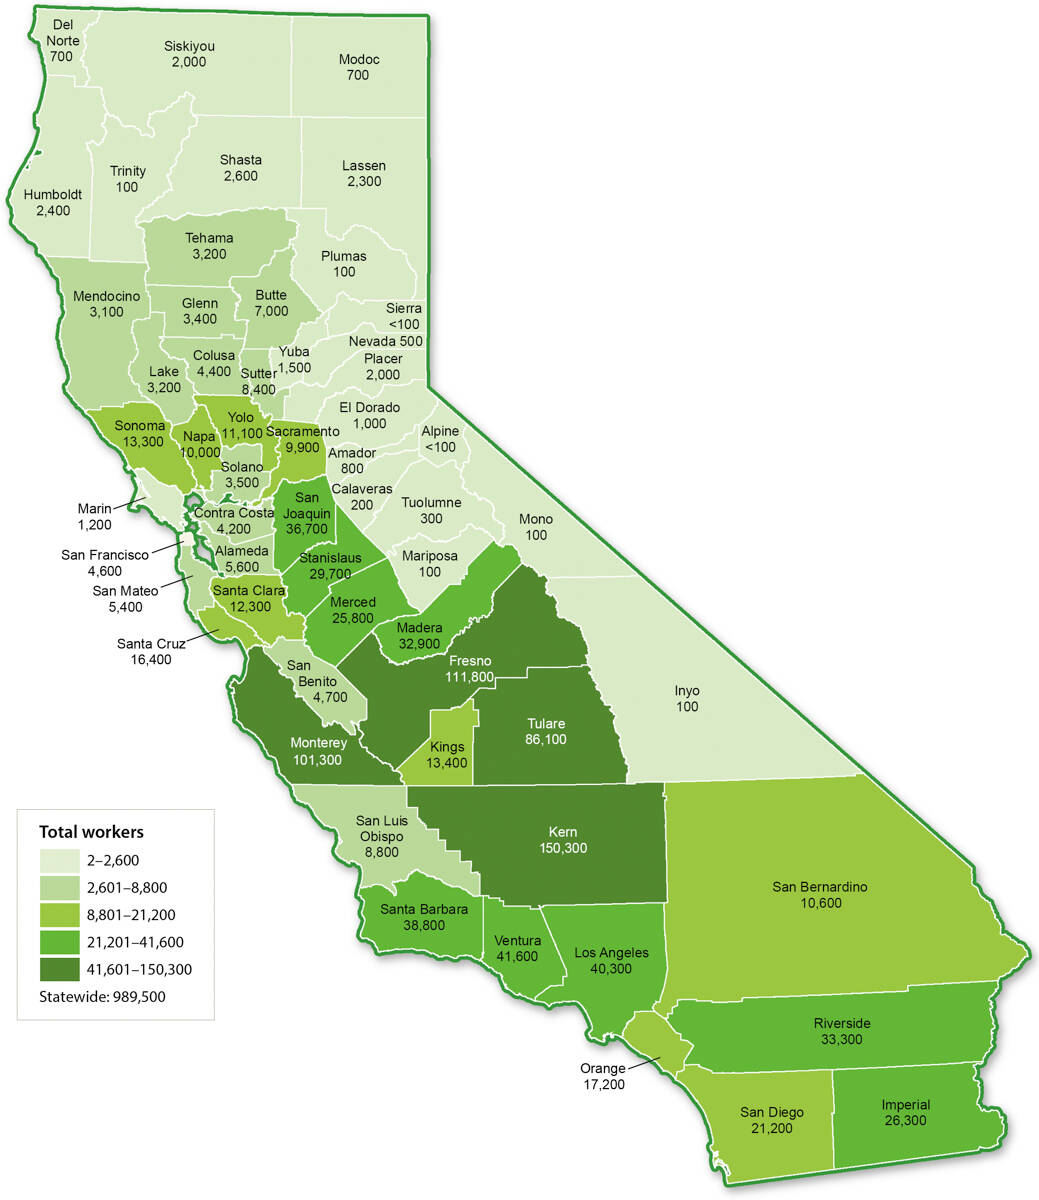 Farmworkers by county, 2016.